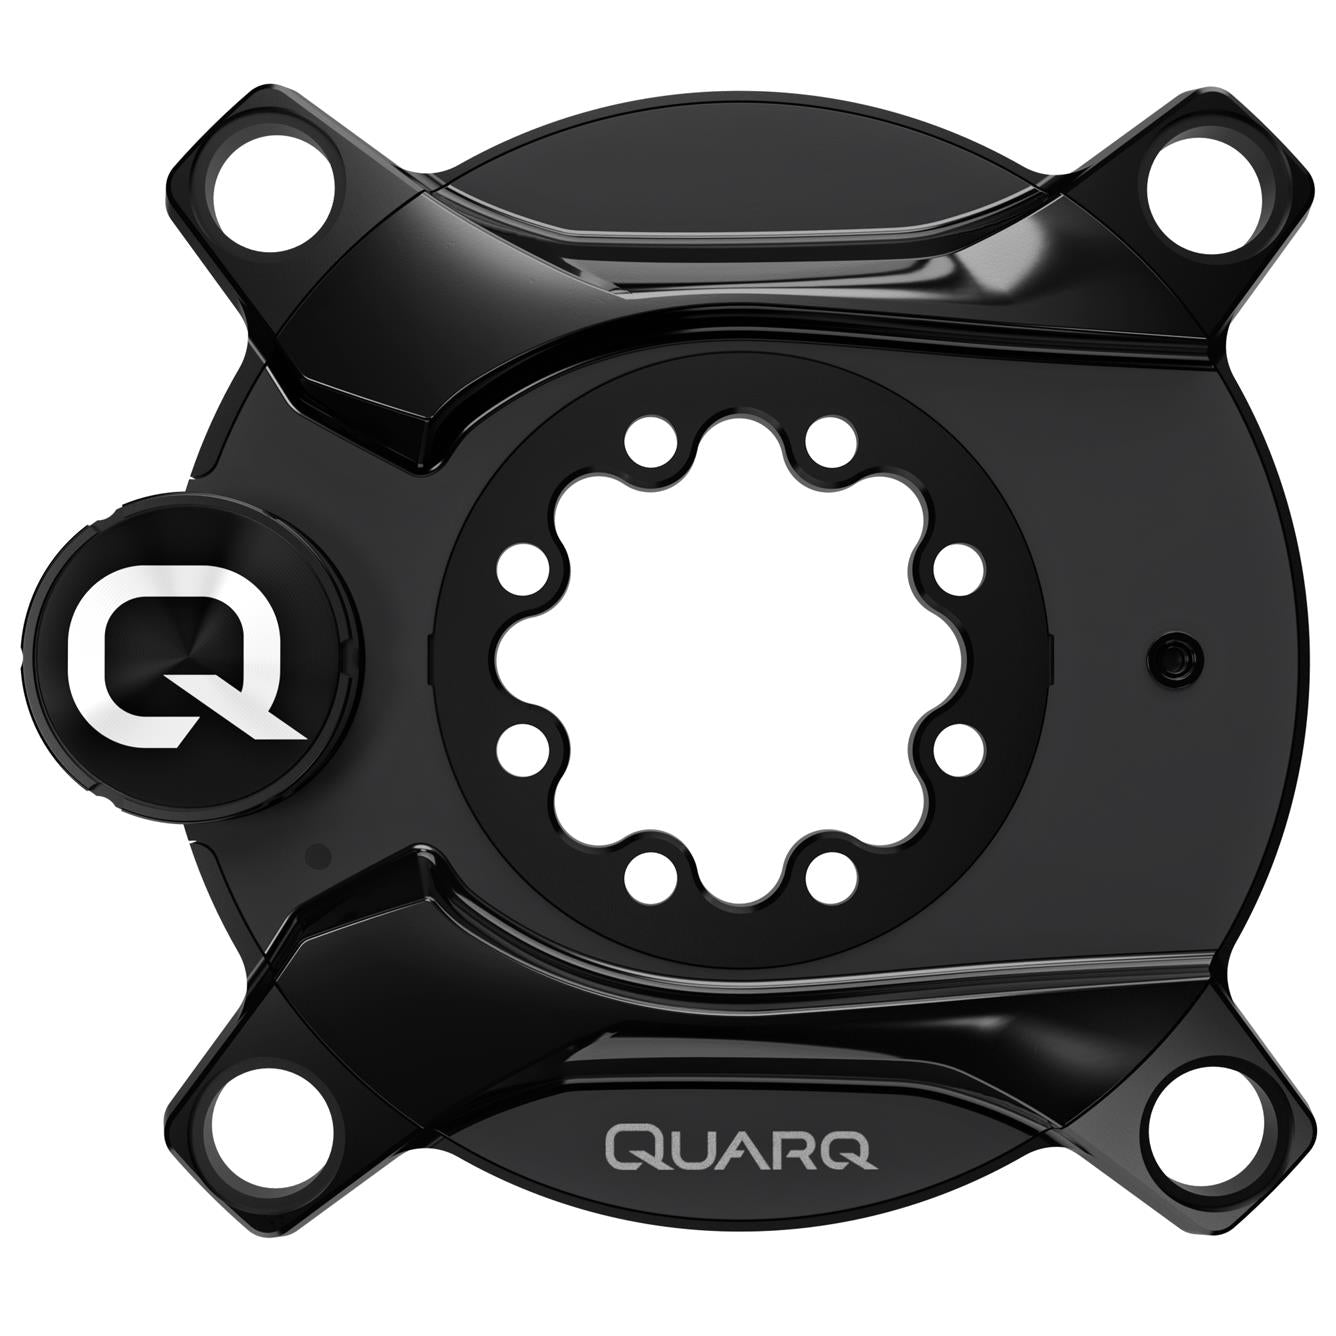 Quarq Powermeter Spider Quarq Dzero Axs Dub Xx1 Eagle, Spider Only (Crank Arms/Chainrings Not Included)